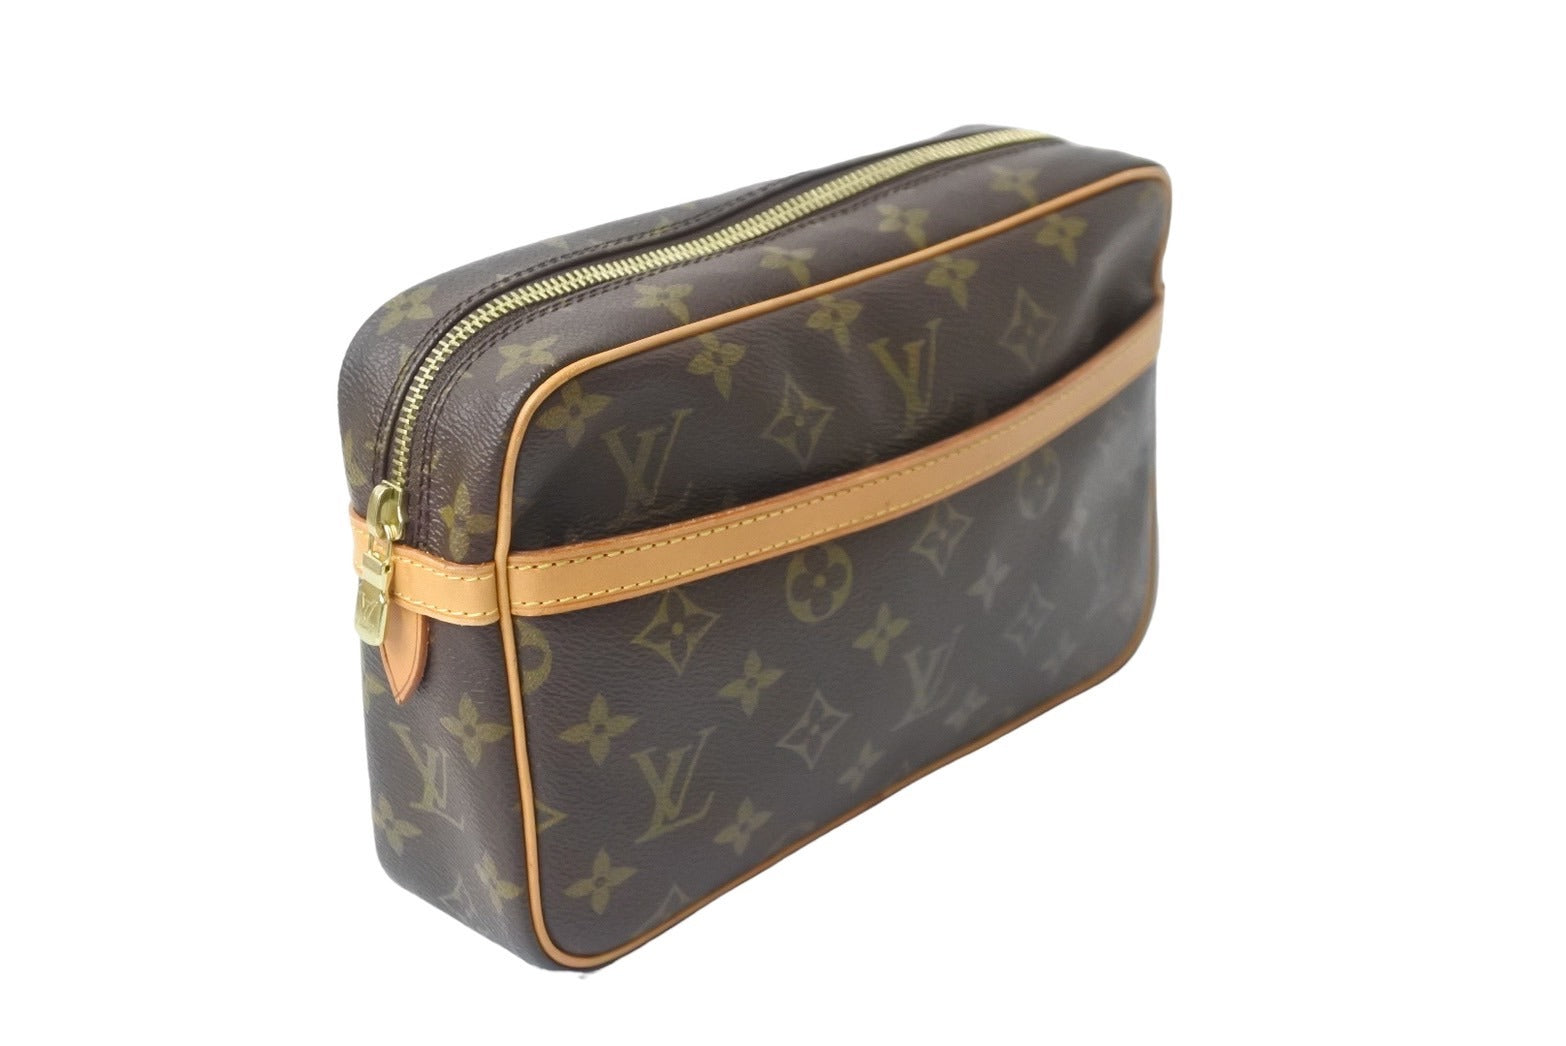 LOUIS VUITTON ルイヴィトン クラッチバッグ M51847 コンピエーニュ 23 ...